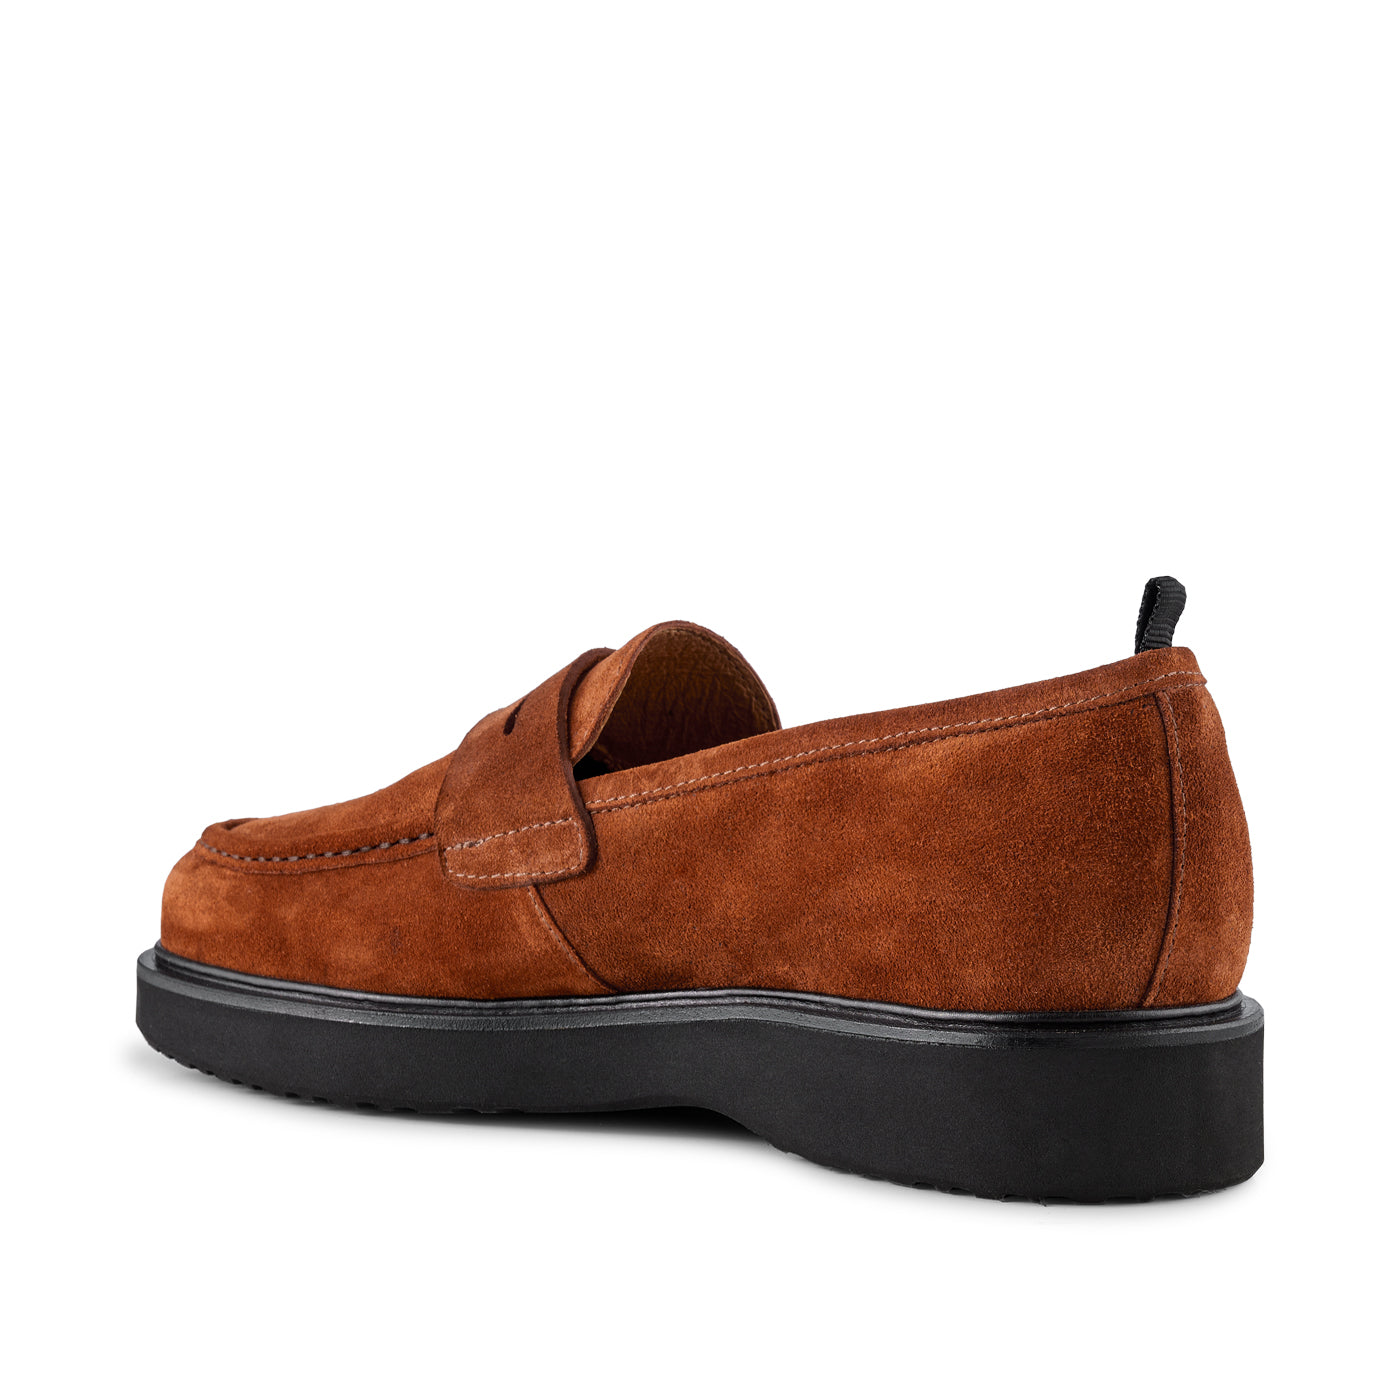 SHOE THE BEAR MENS Cosmos loafer ruskind Loafers 198 RUST